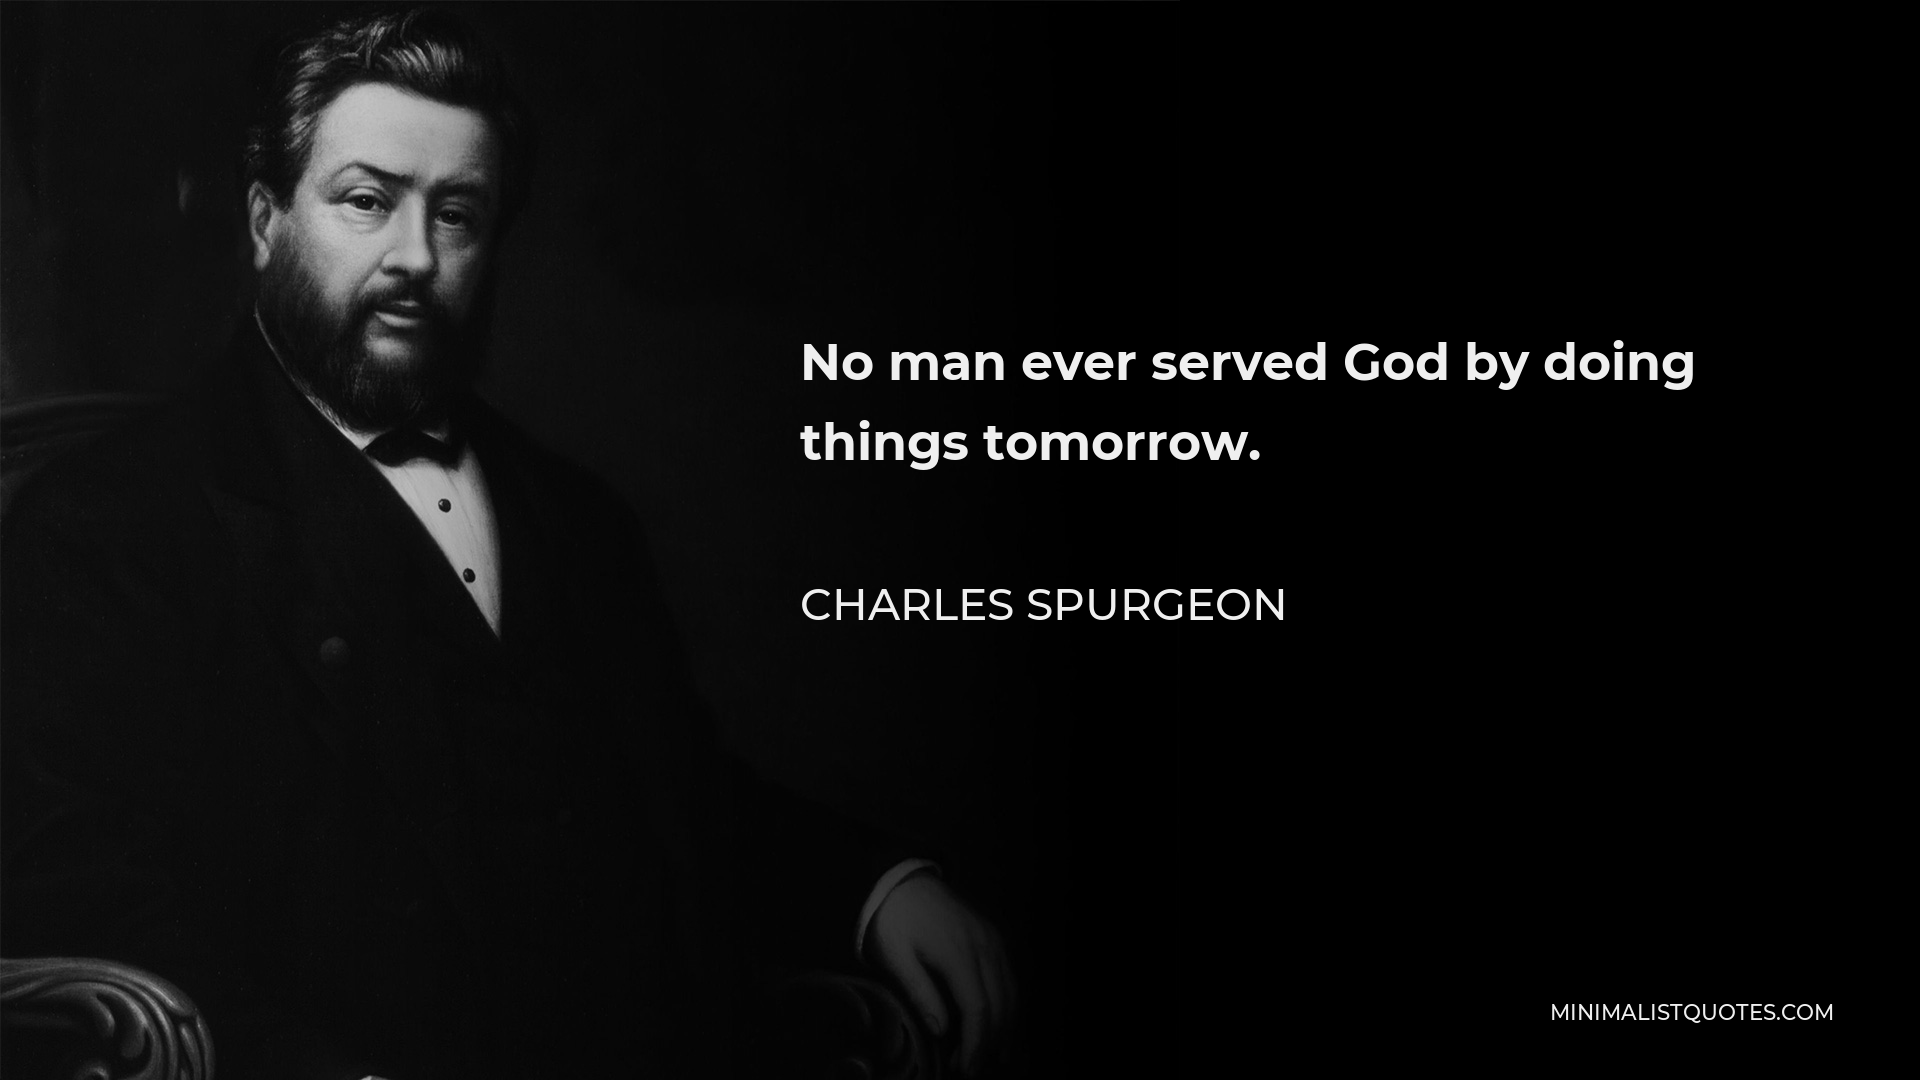 Charles Spurgeon Quote - No man ever served God by doing things tomorrow.